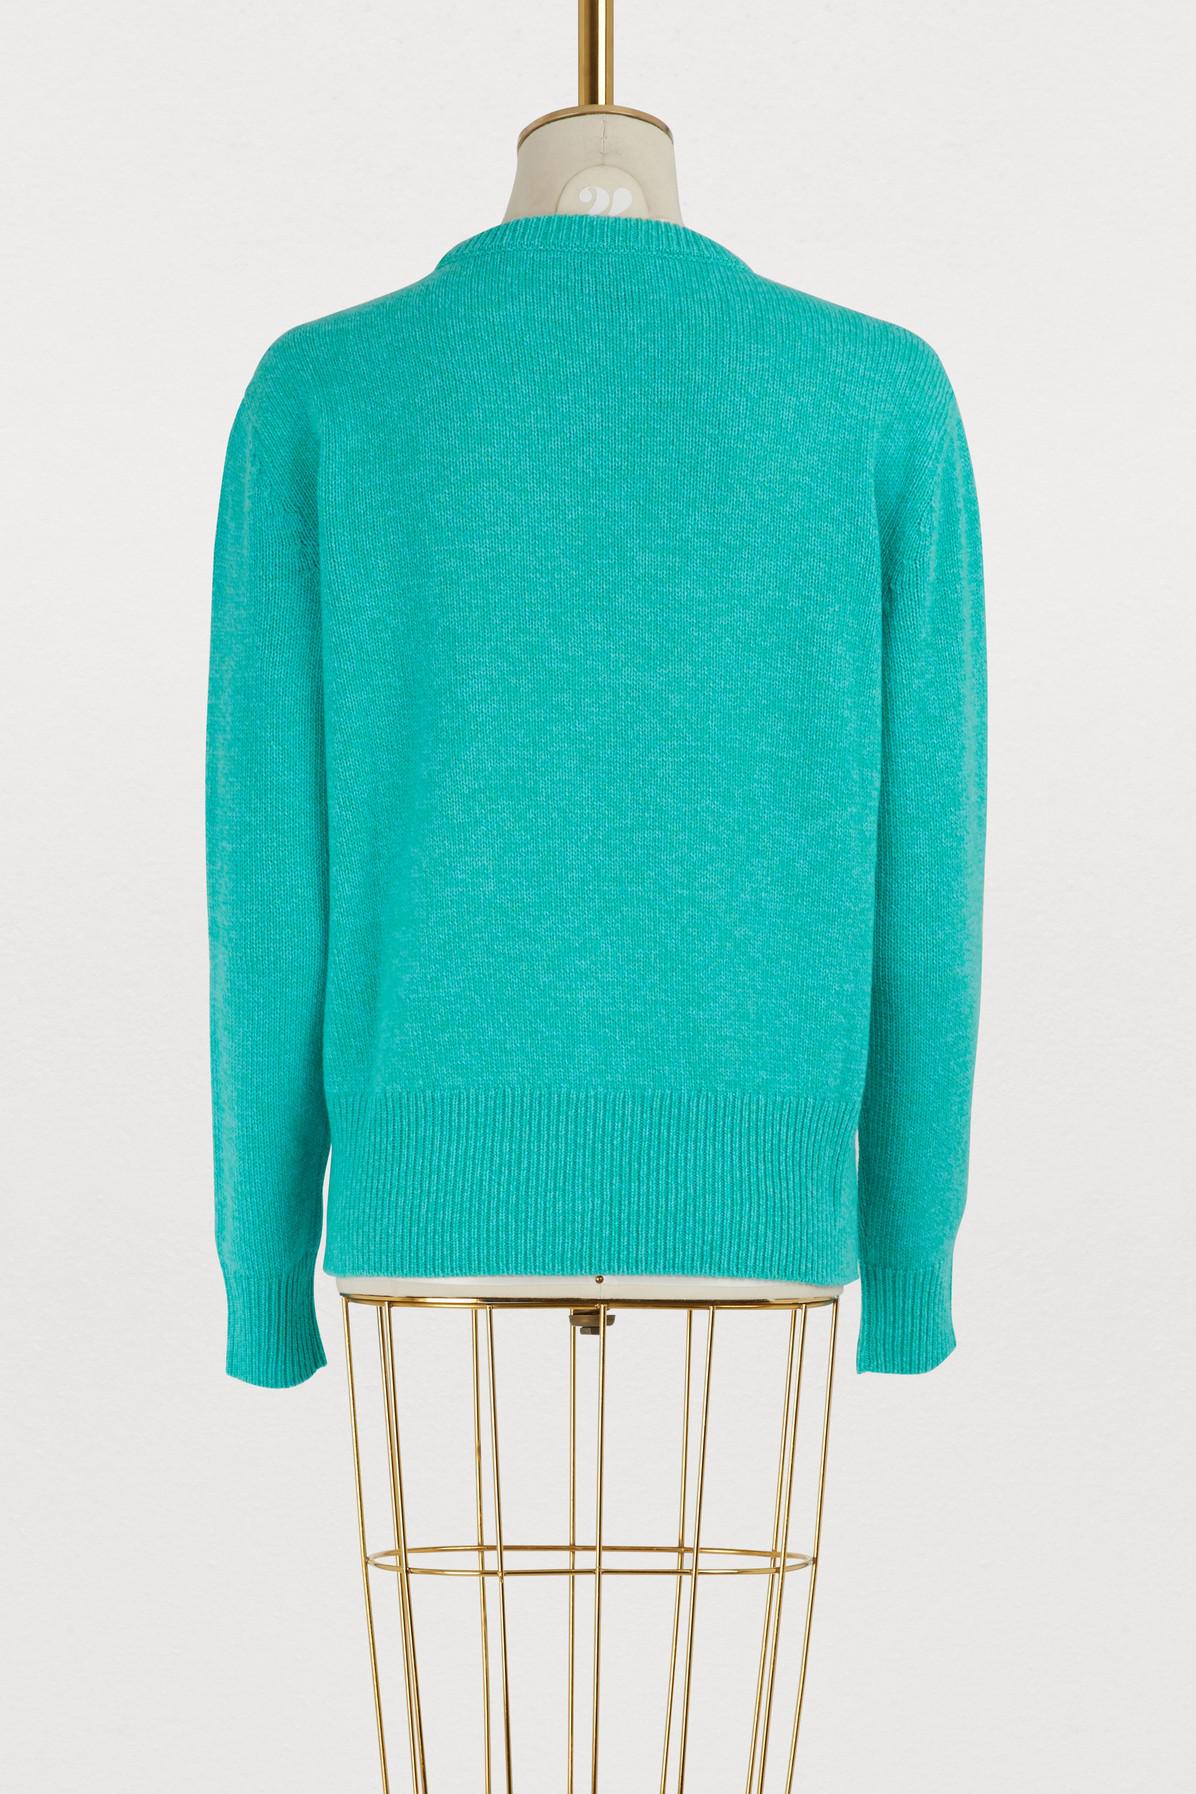 Gucci Bambi Wool Sweater in Blue - Lyst